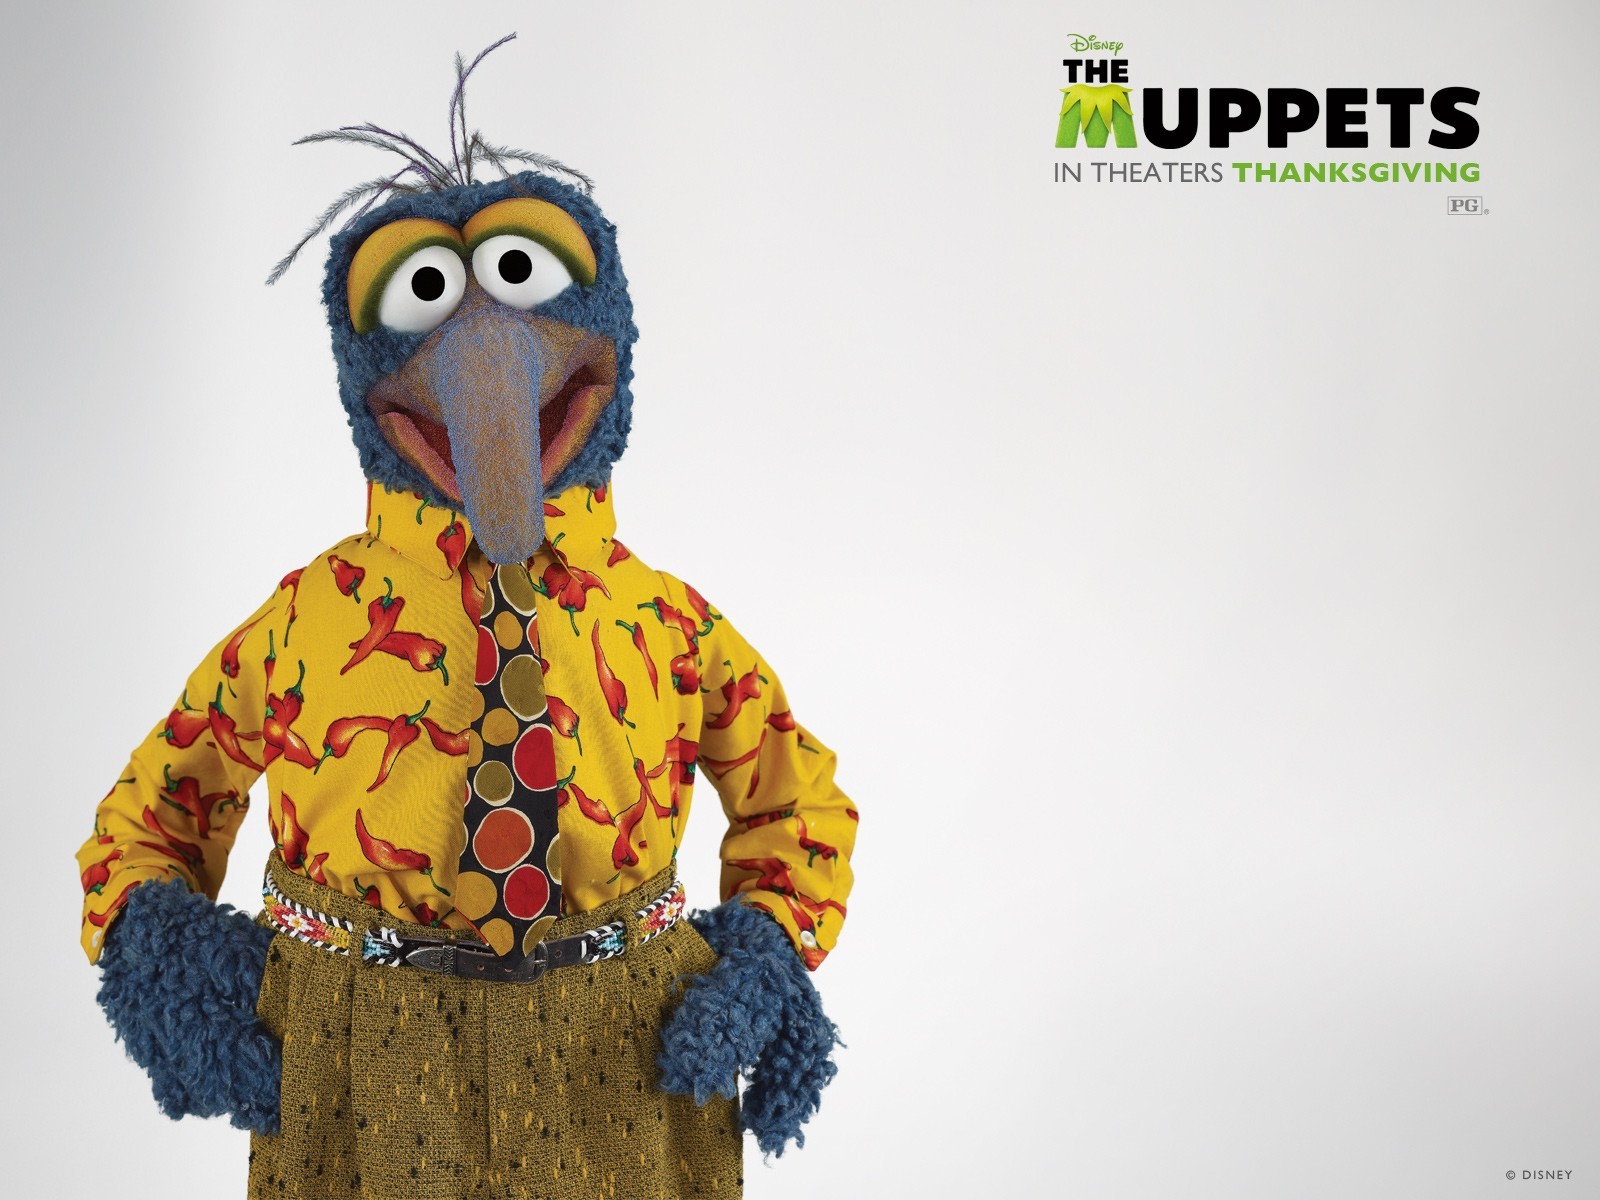 More The Muppets Wallpaper On Prev Next